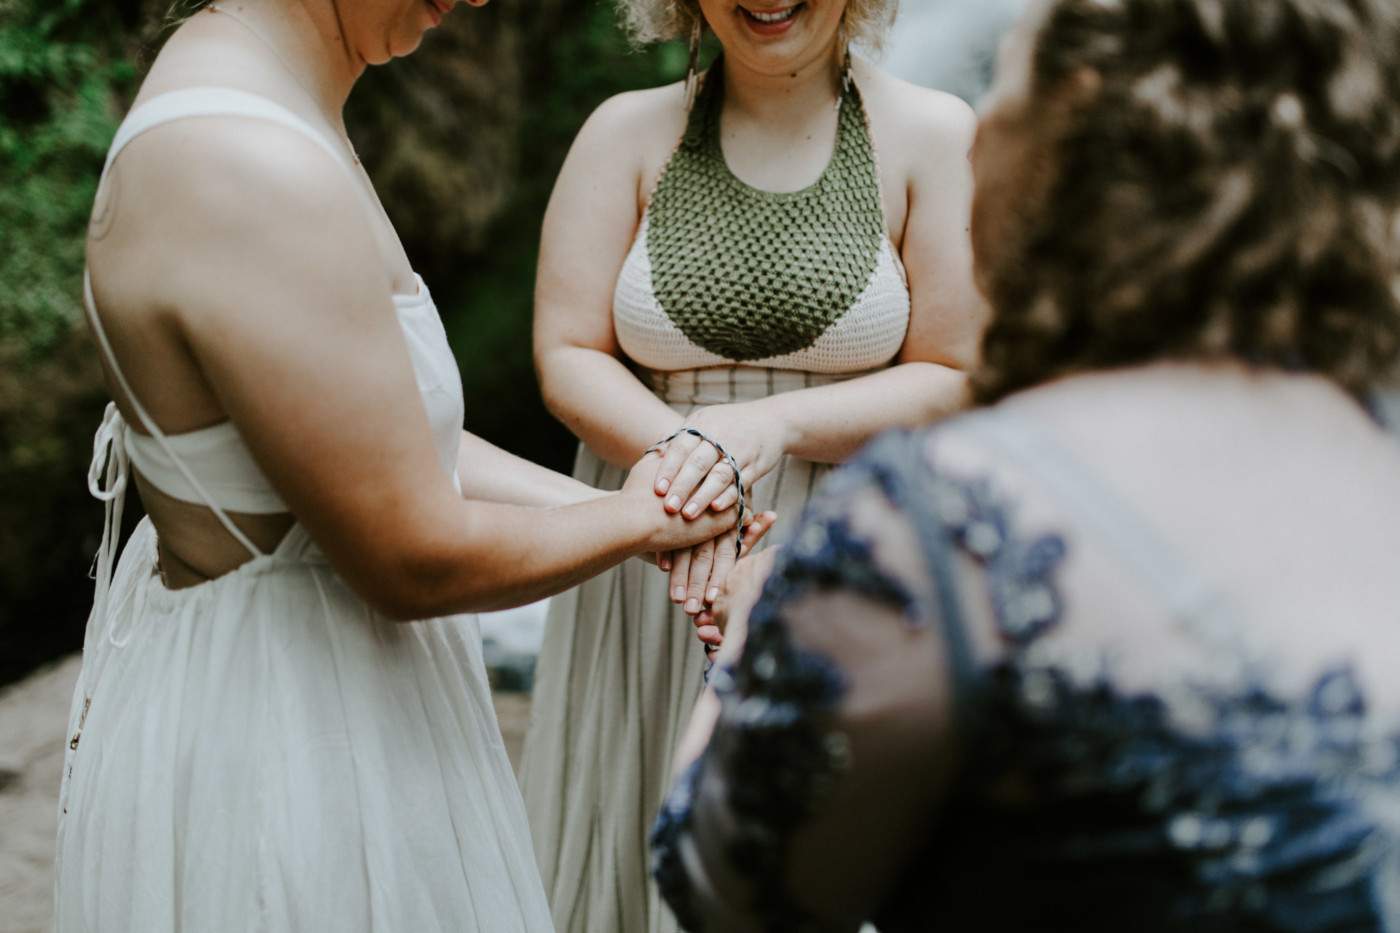 Audrey and Kate at their elopement ceremony. Elopement wedding photography at Bridal Veil Falls by Sienna Plus Josh.